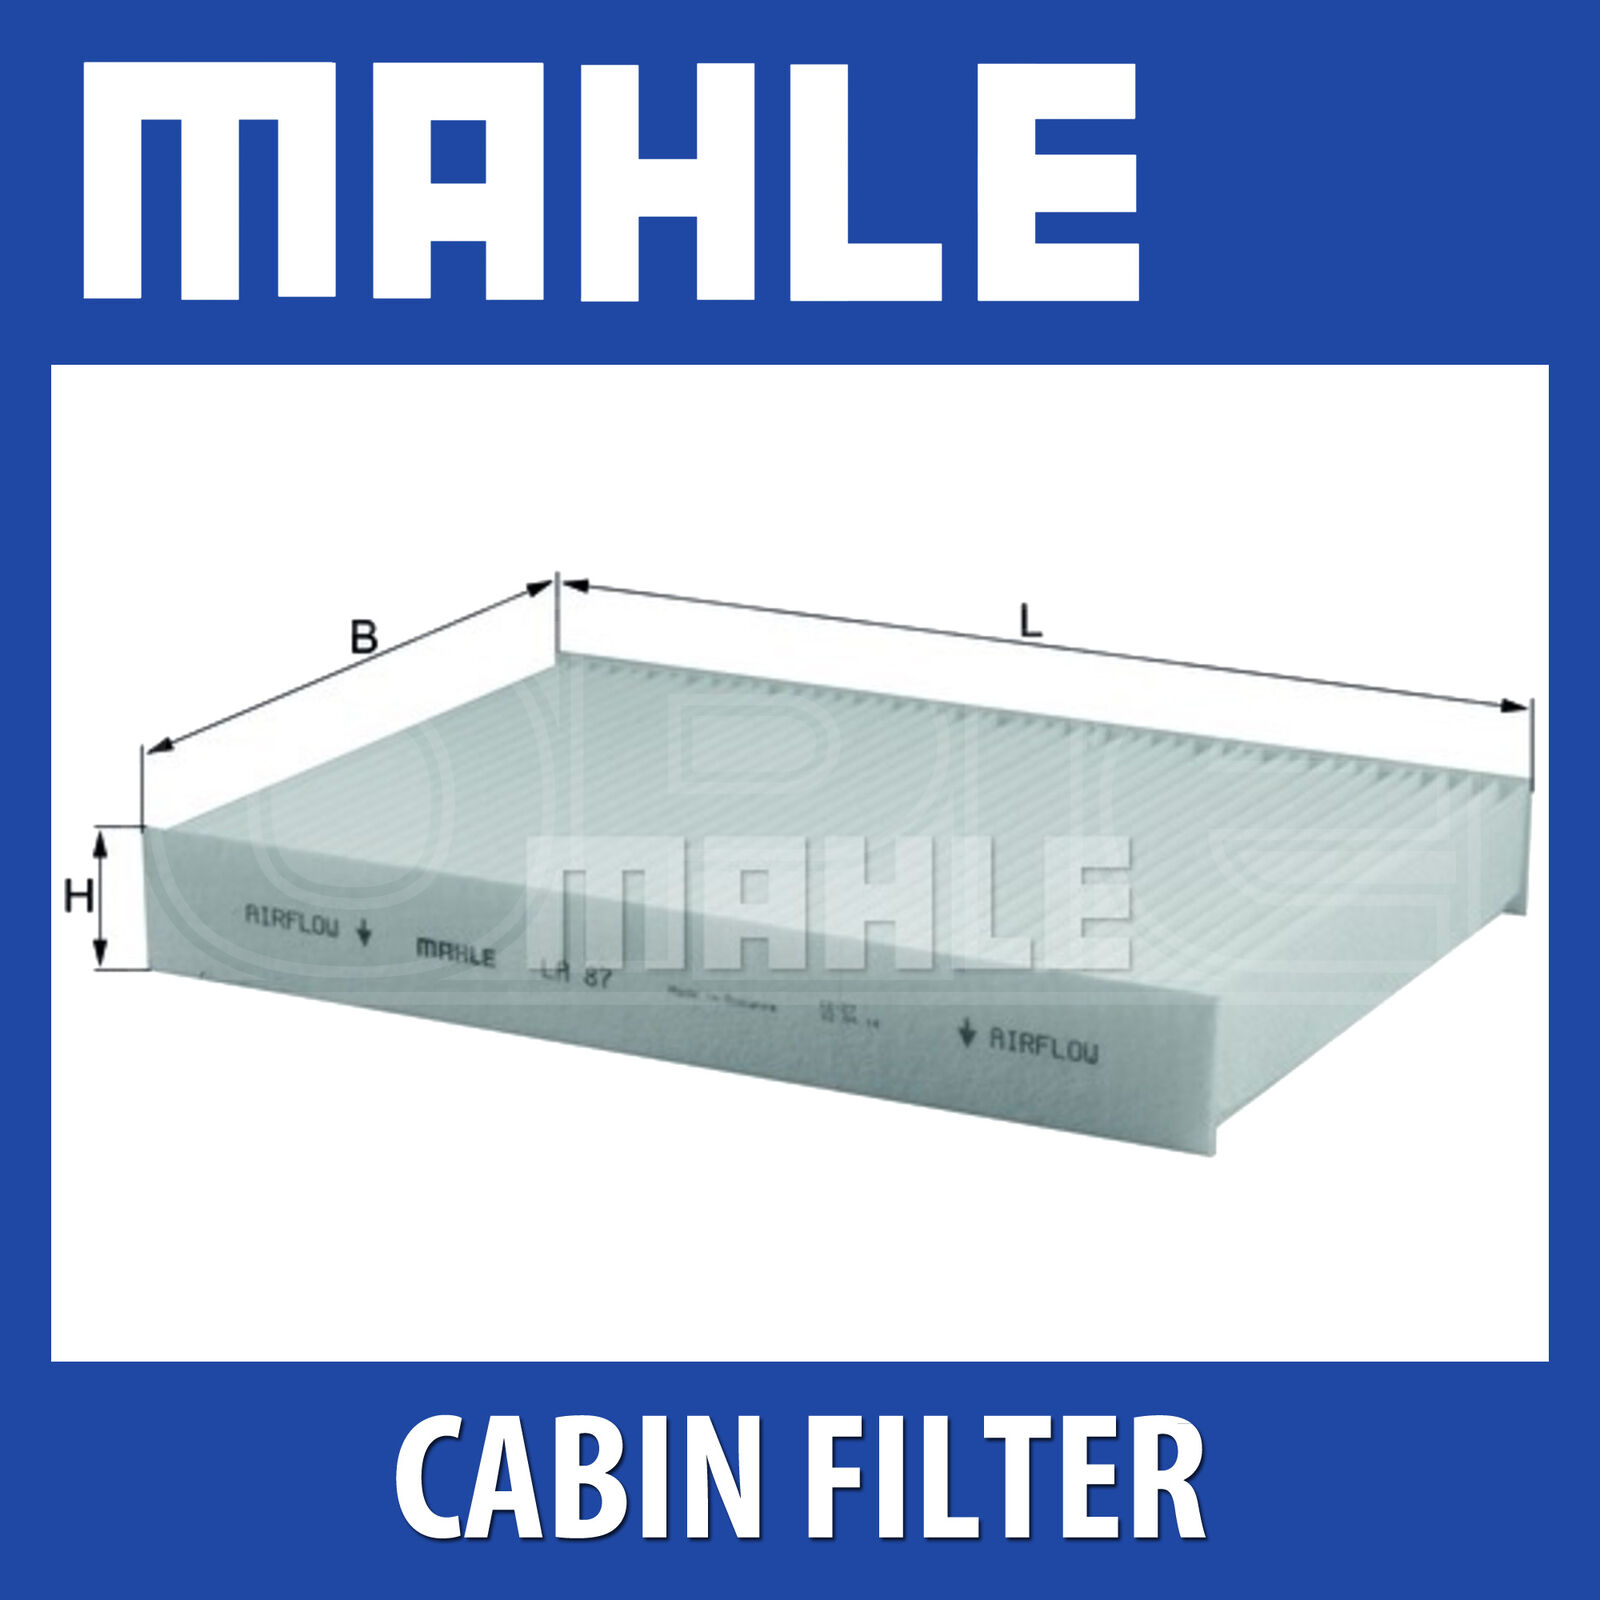 Mahle Pollen Air Filter for Cabin Filter LA87 Fits Renault Clio Megane